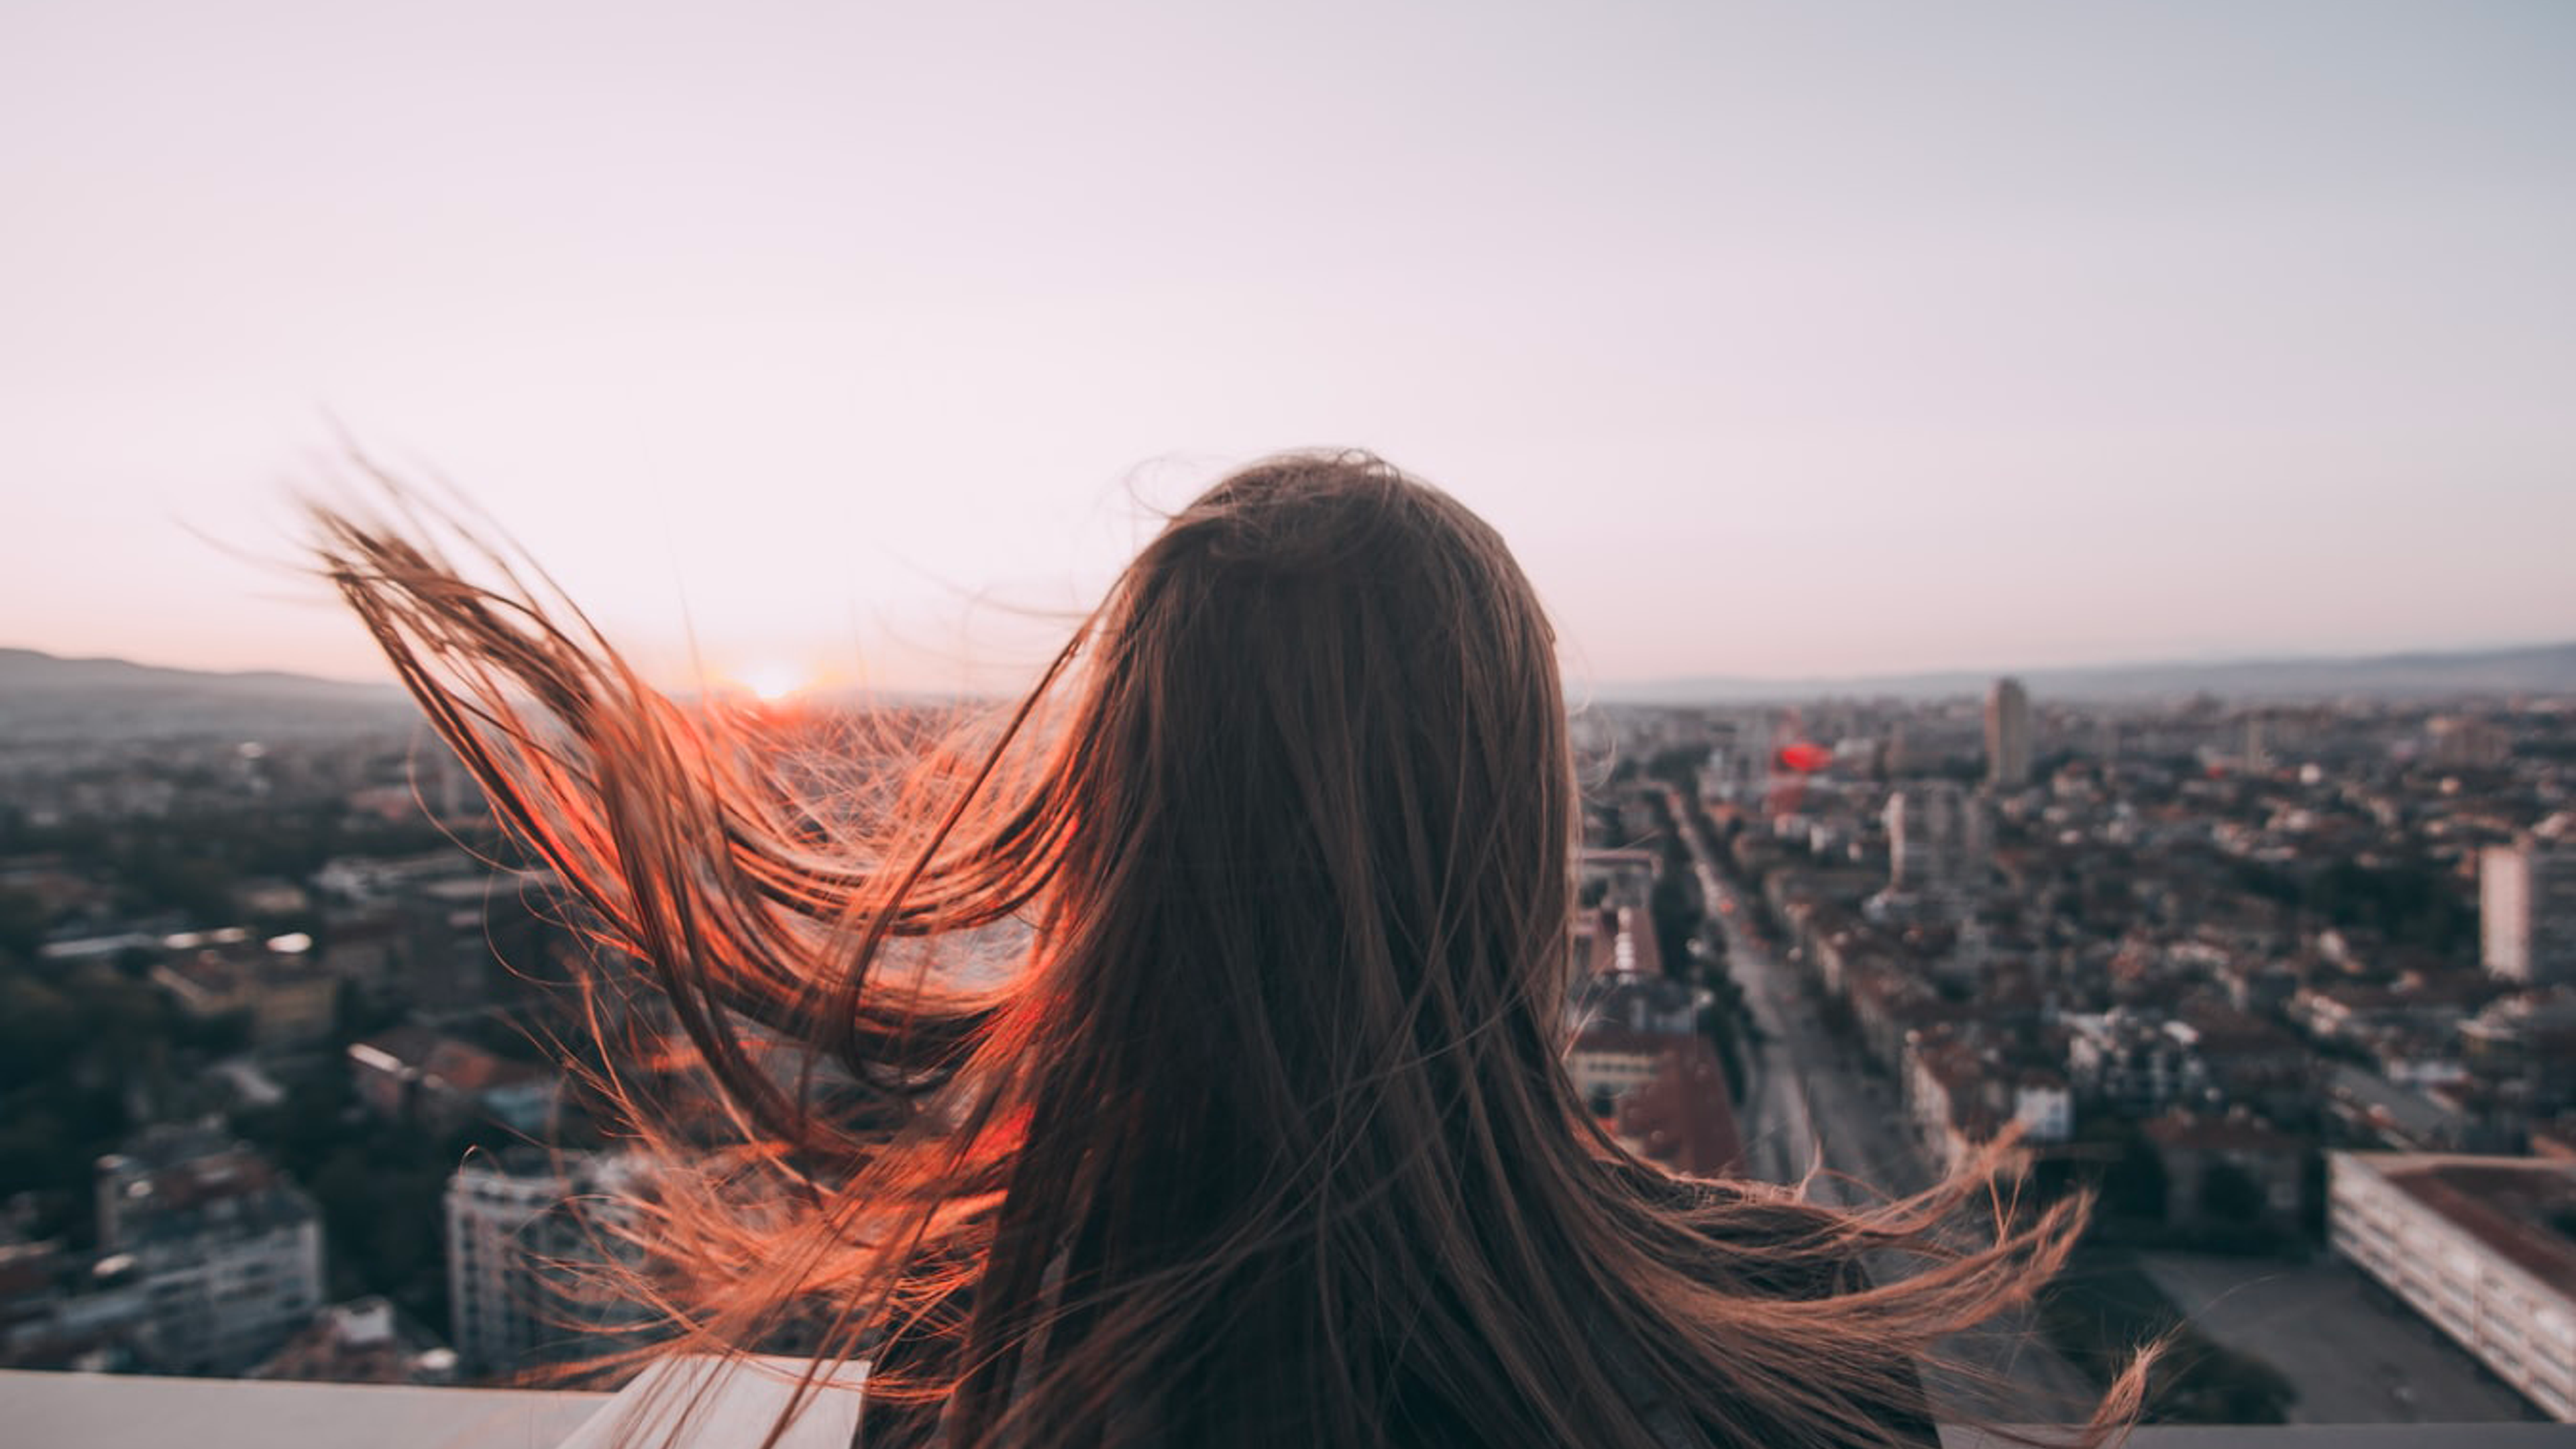 Person with long hair in the wind looking over the city